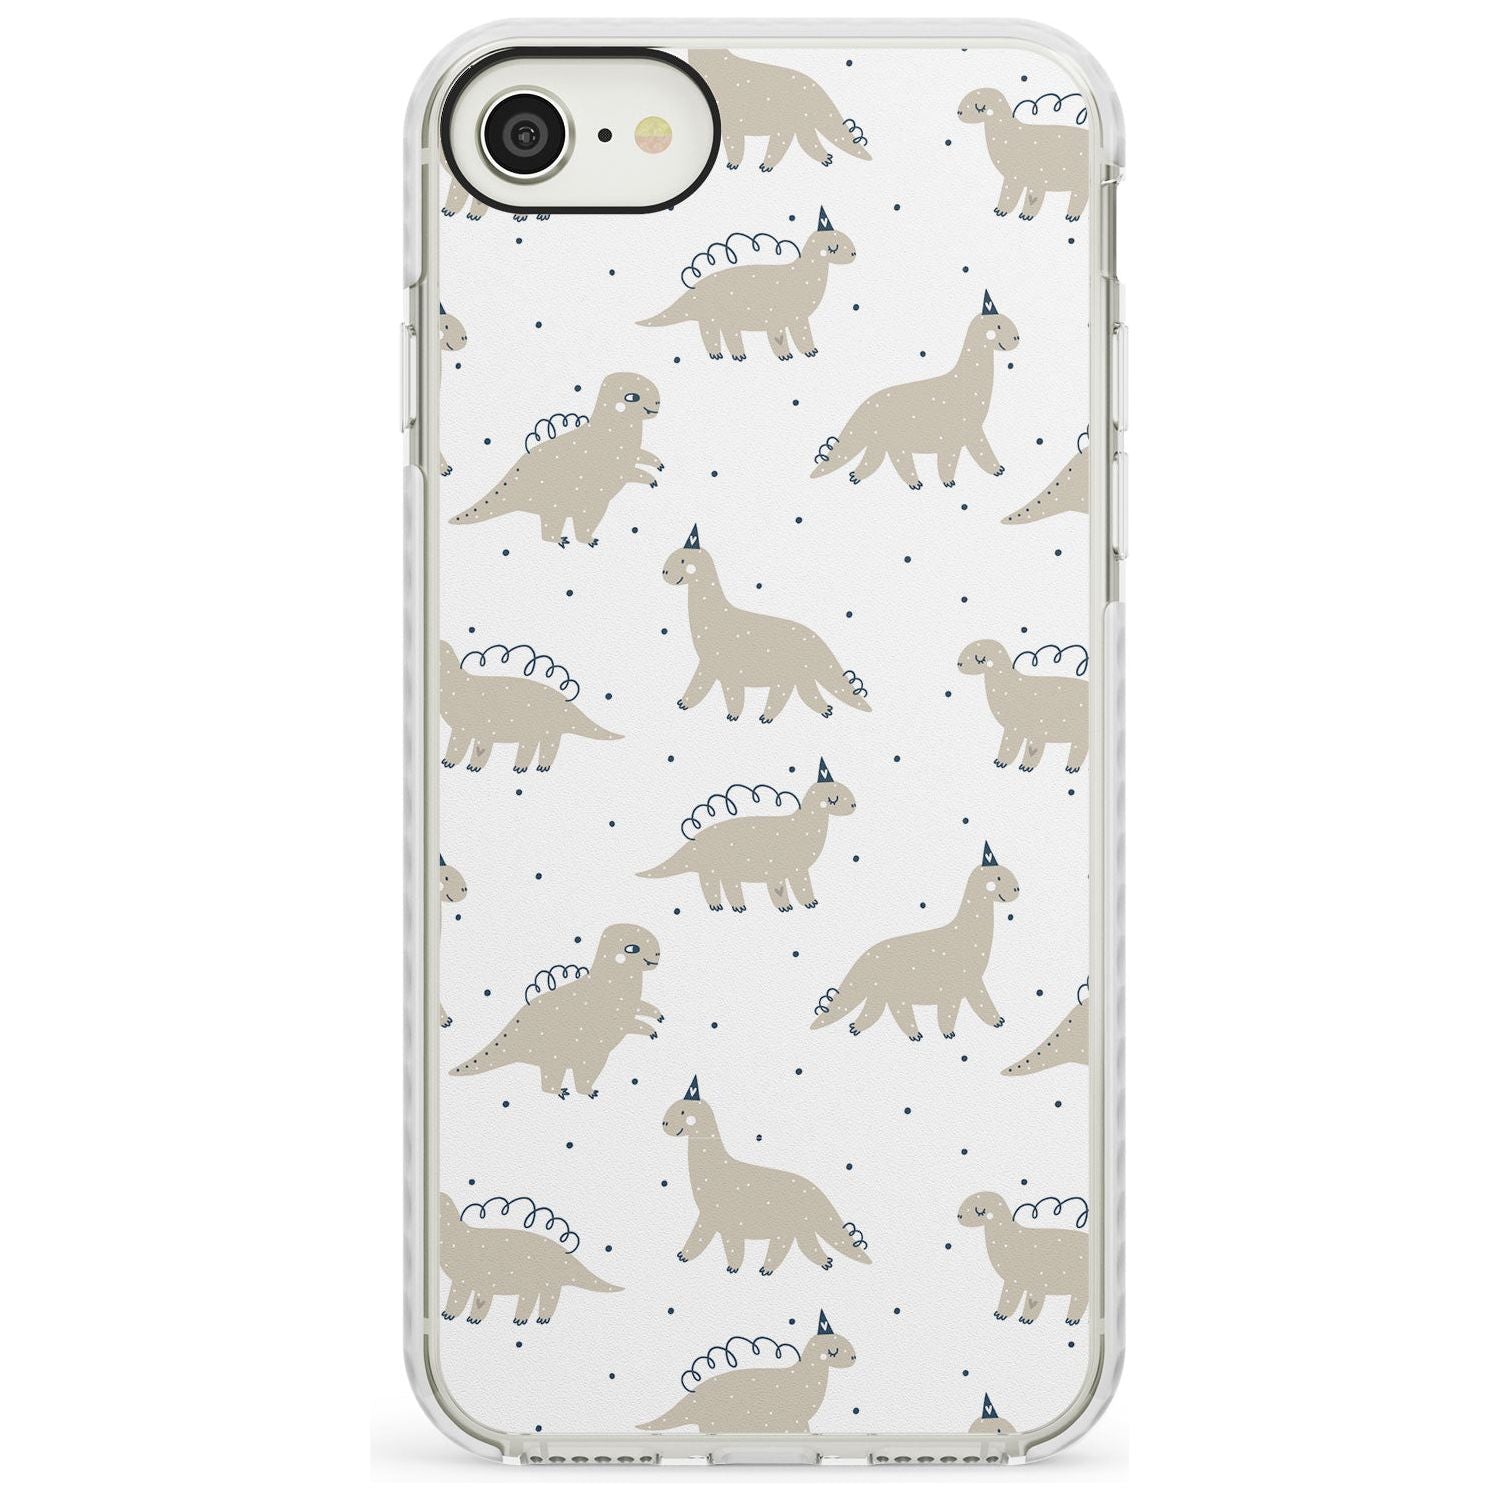 Adorable Dinosaurs Pattern Impact Phone Case for iPhone SE 8 7 Plus